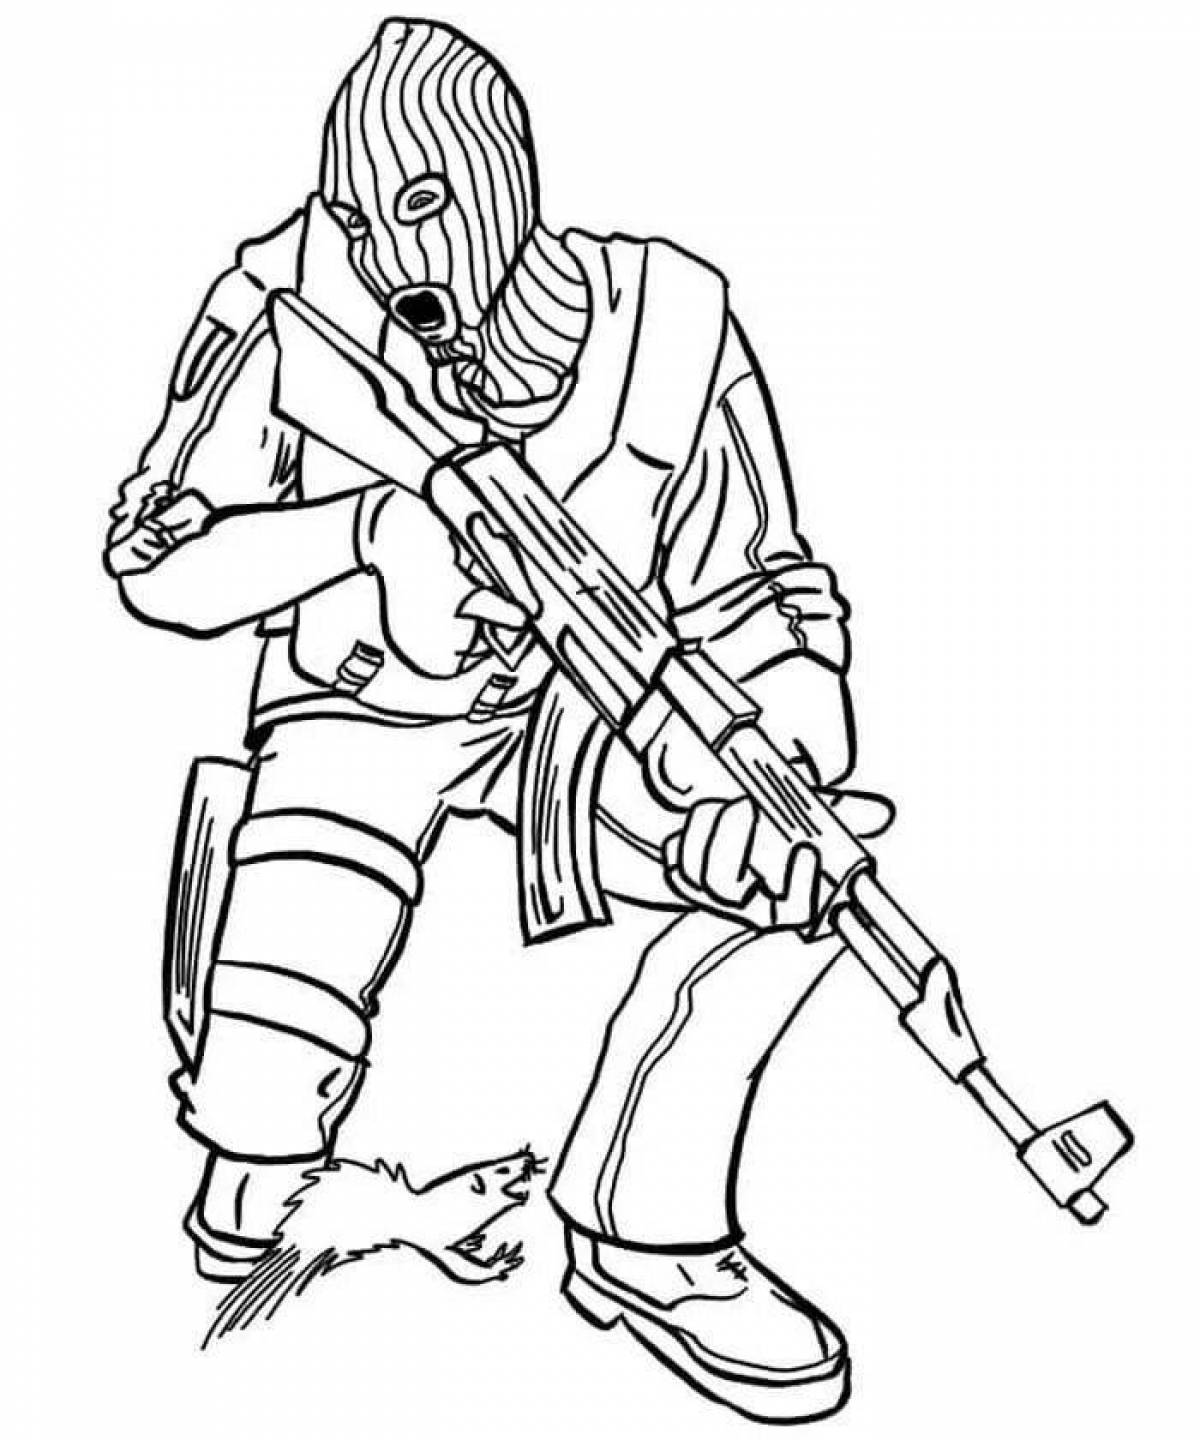 Coloring page daring confrontation